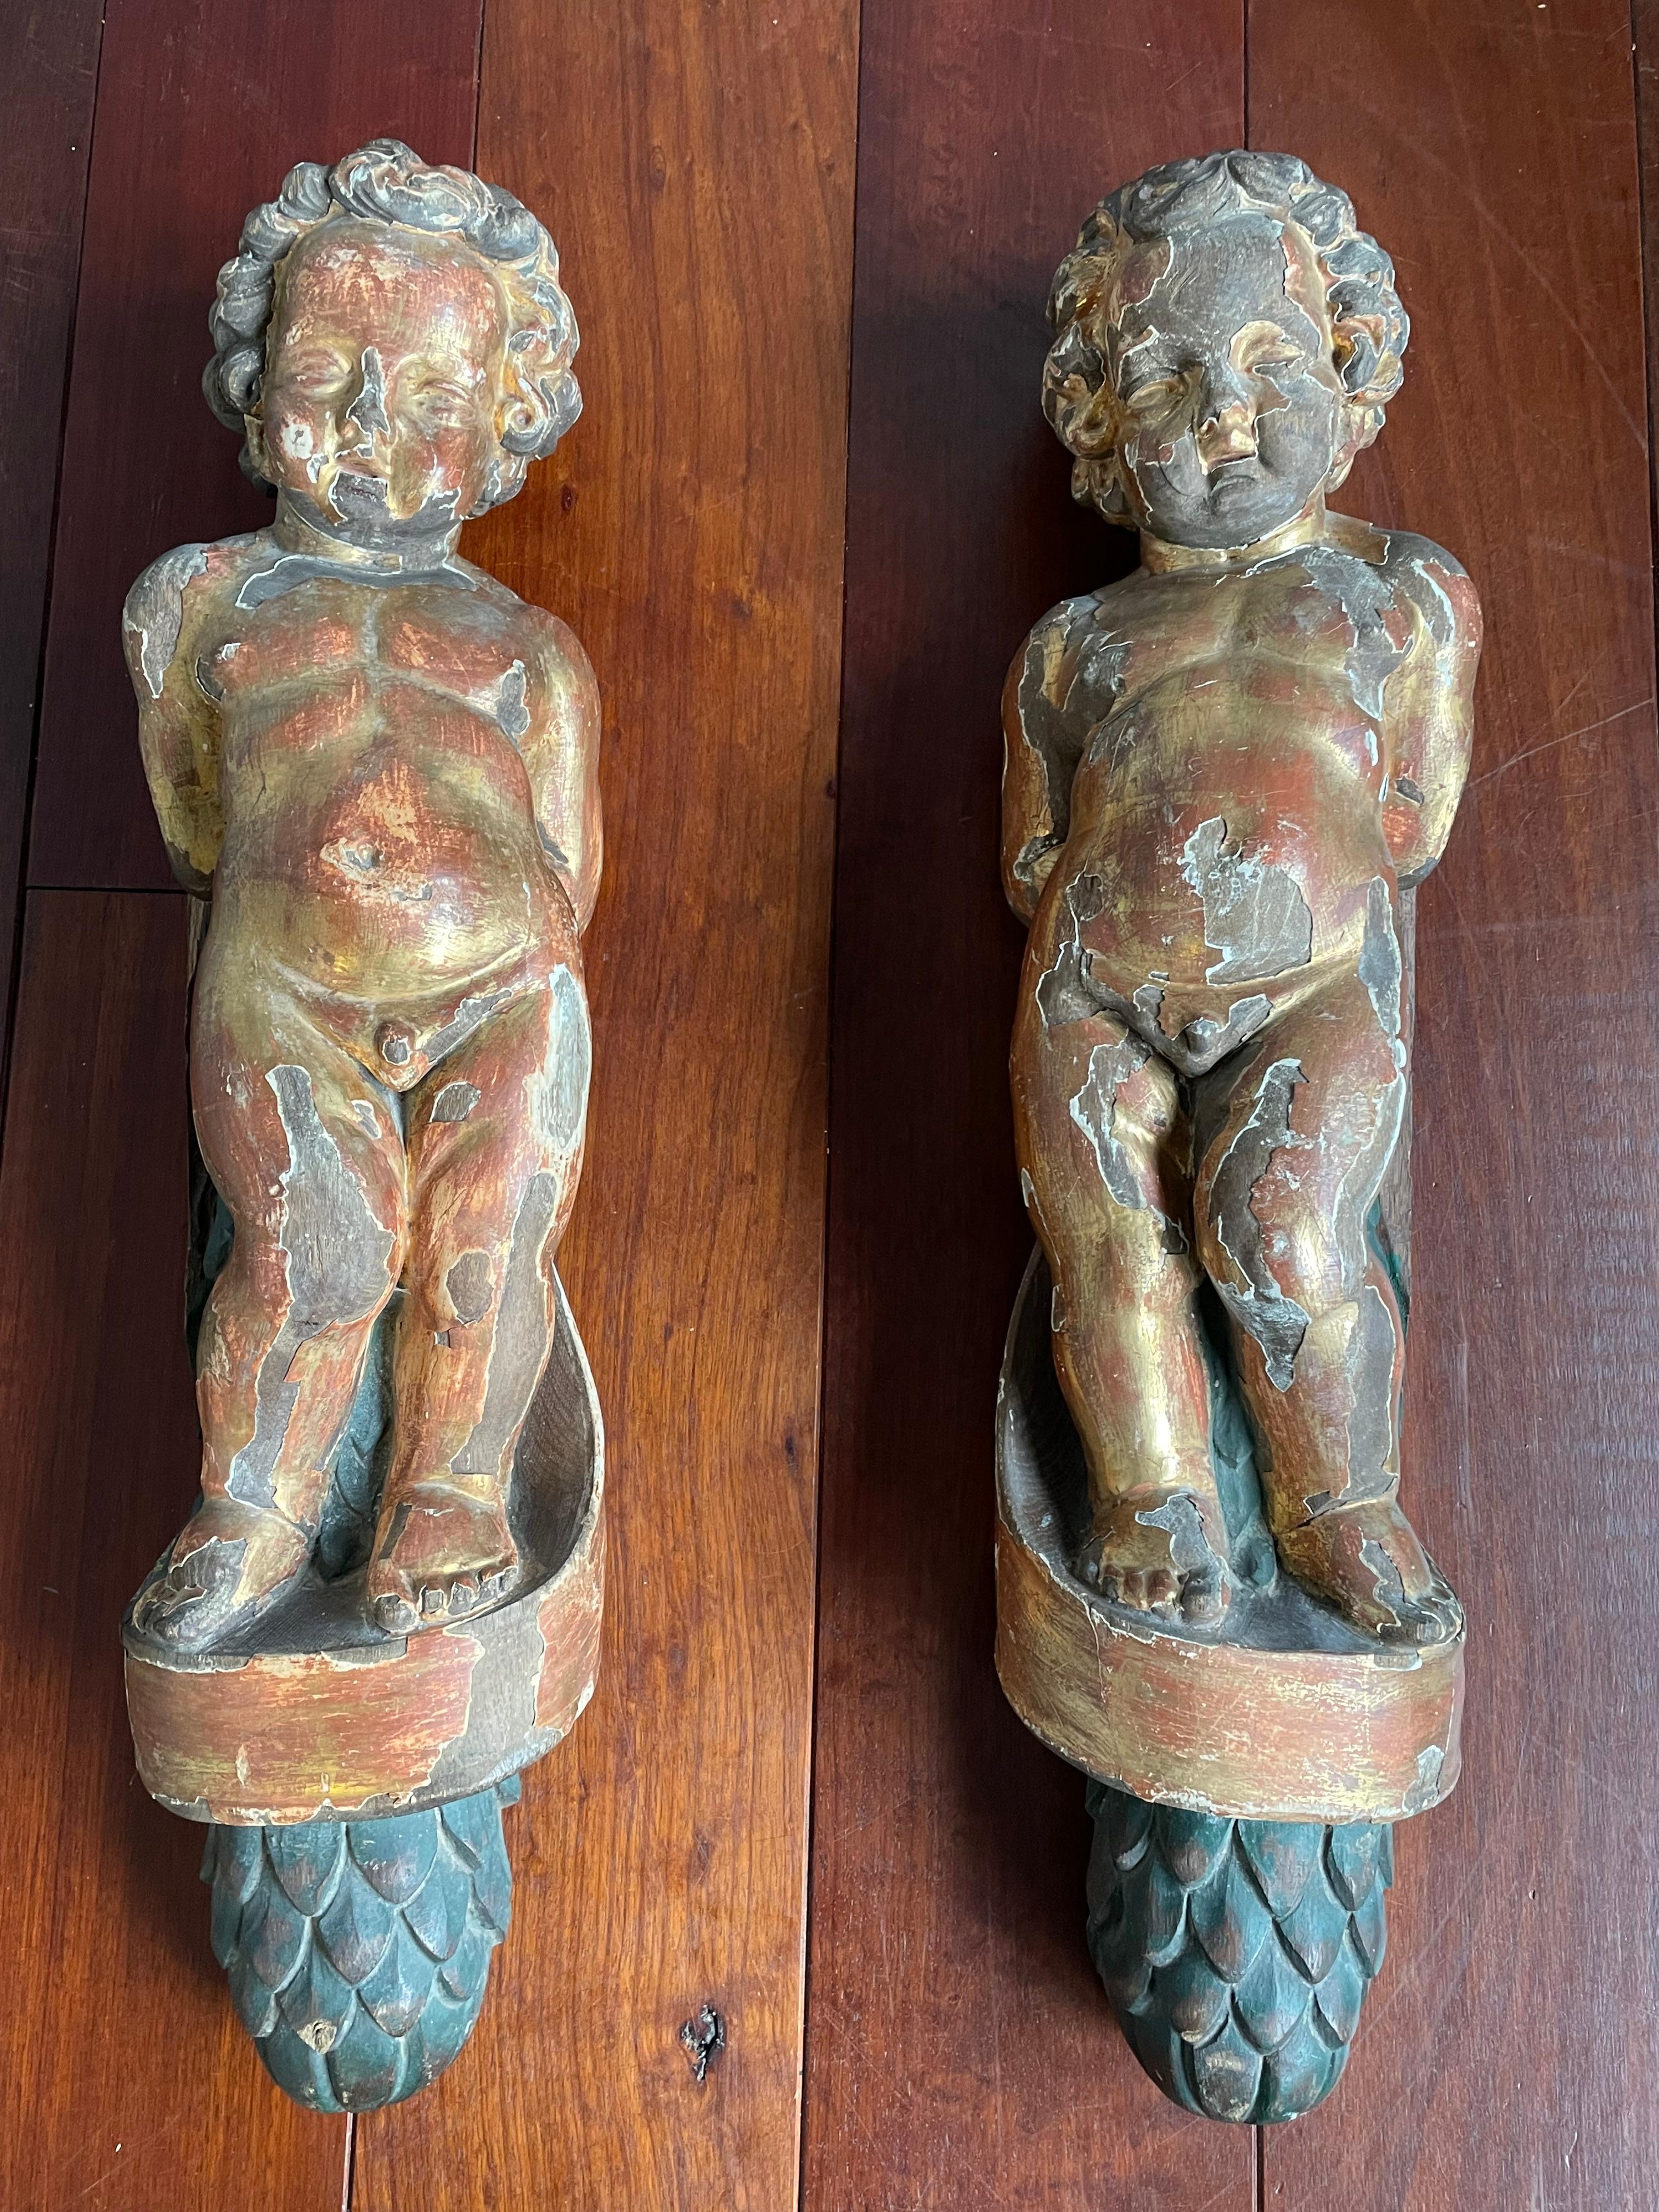 Beautifully aged, Baroque Revival putti sculptures for wall mounting.

If you are looking for decorative and handmade antique wall-art to grace your living space then these hand carved and gilt wooden antique putti sculptures could be perfect. You